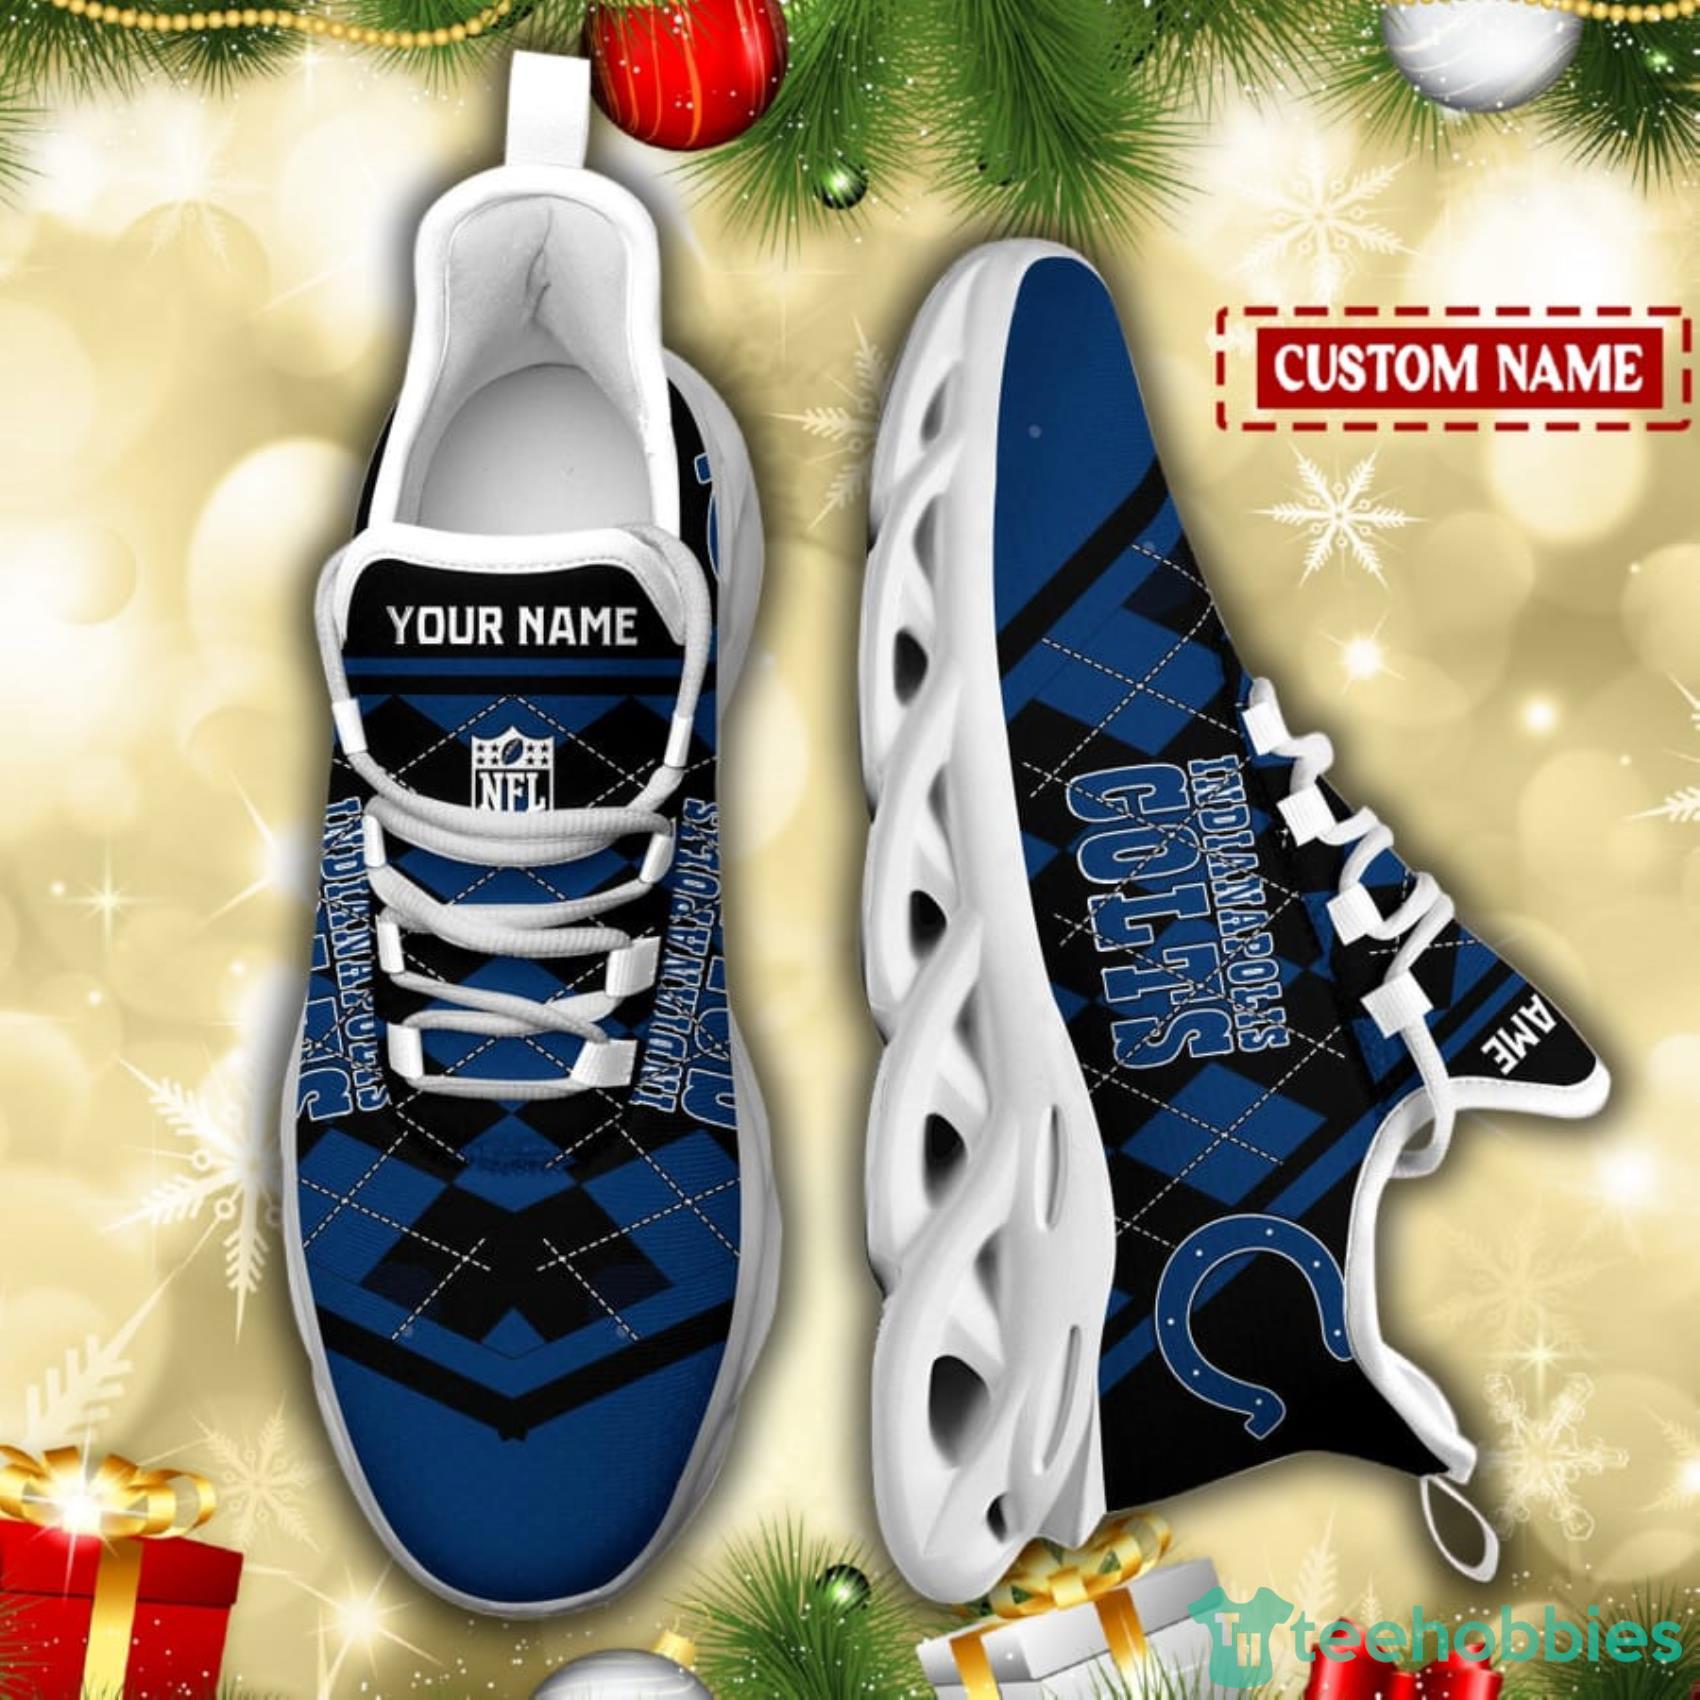 Indianapolis Colts NFL Custom Name Check Plaid Diagonal Pattern Max Soul Shoes Product Photo 5